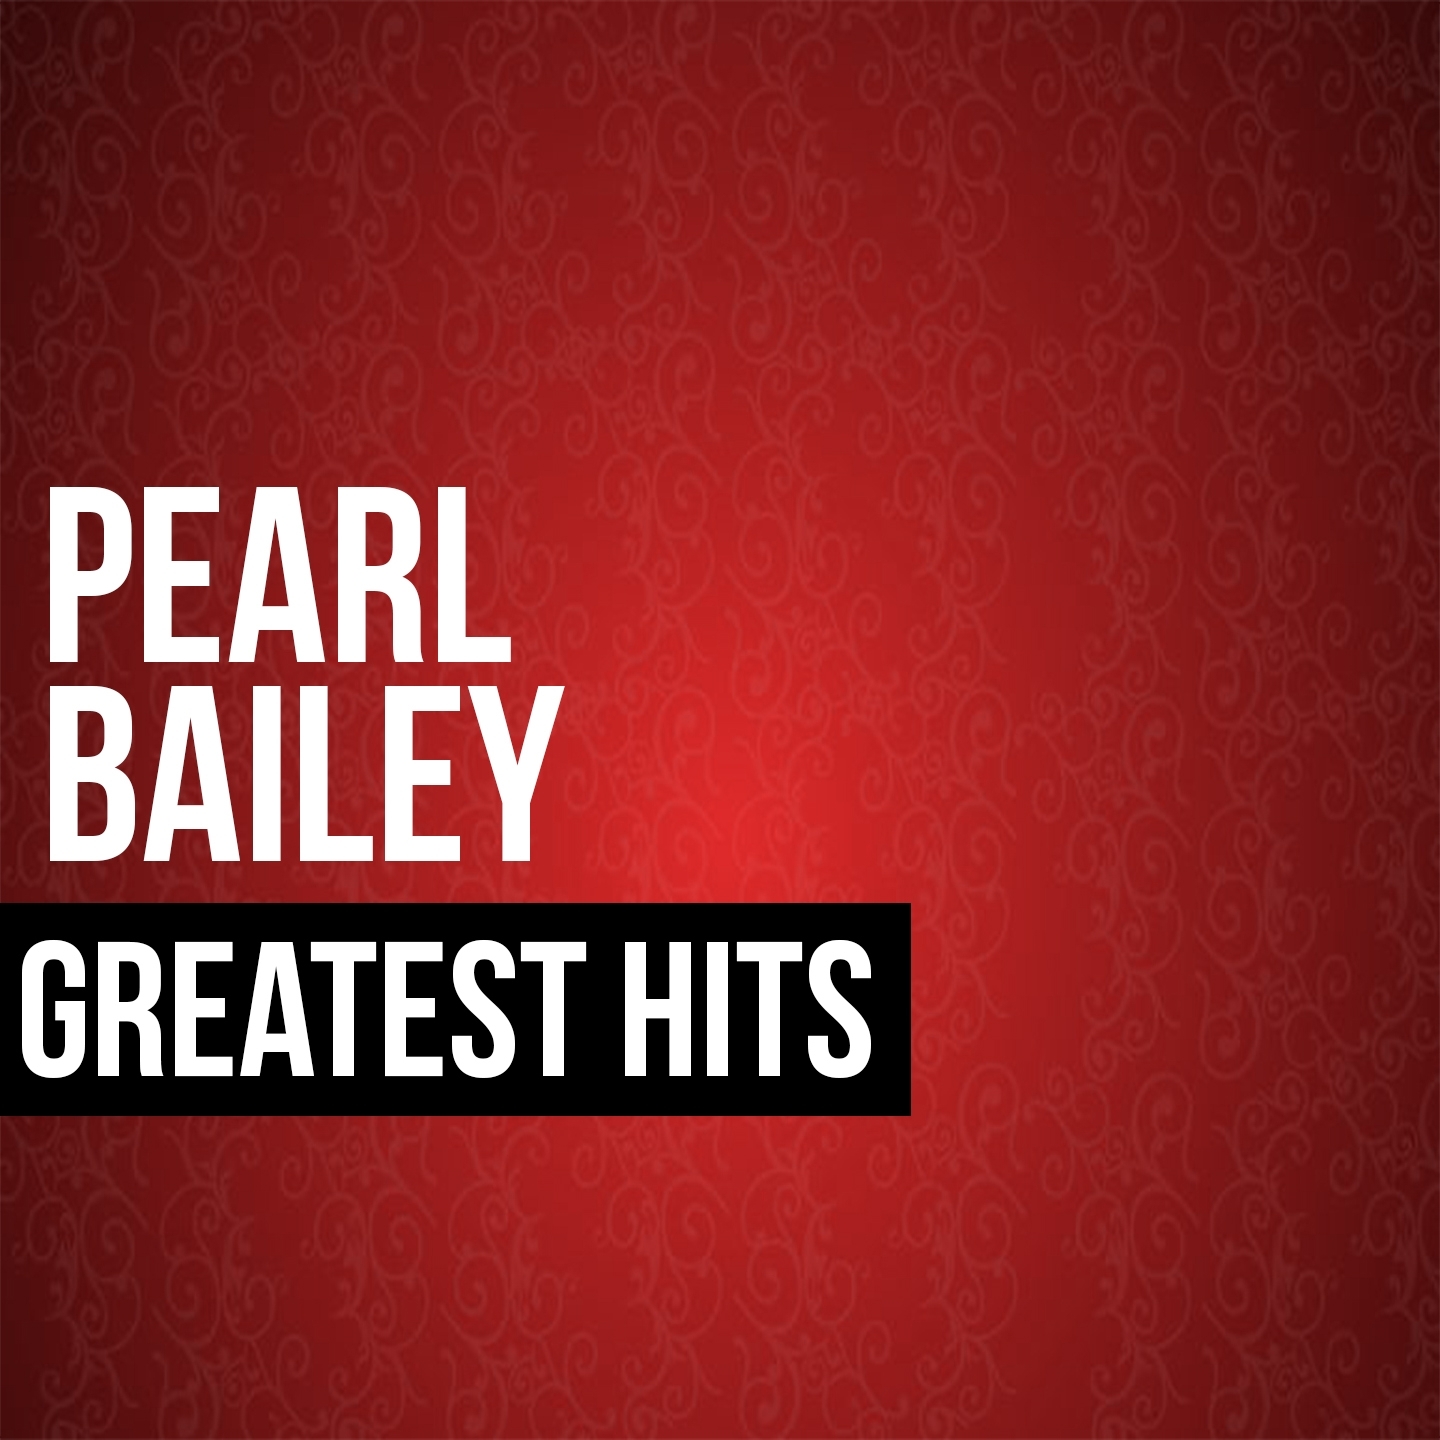 Pearl Bailey Greatest Hits